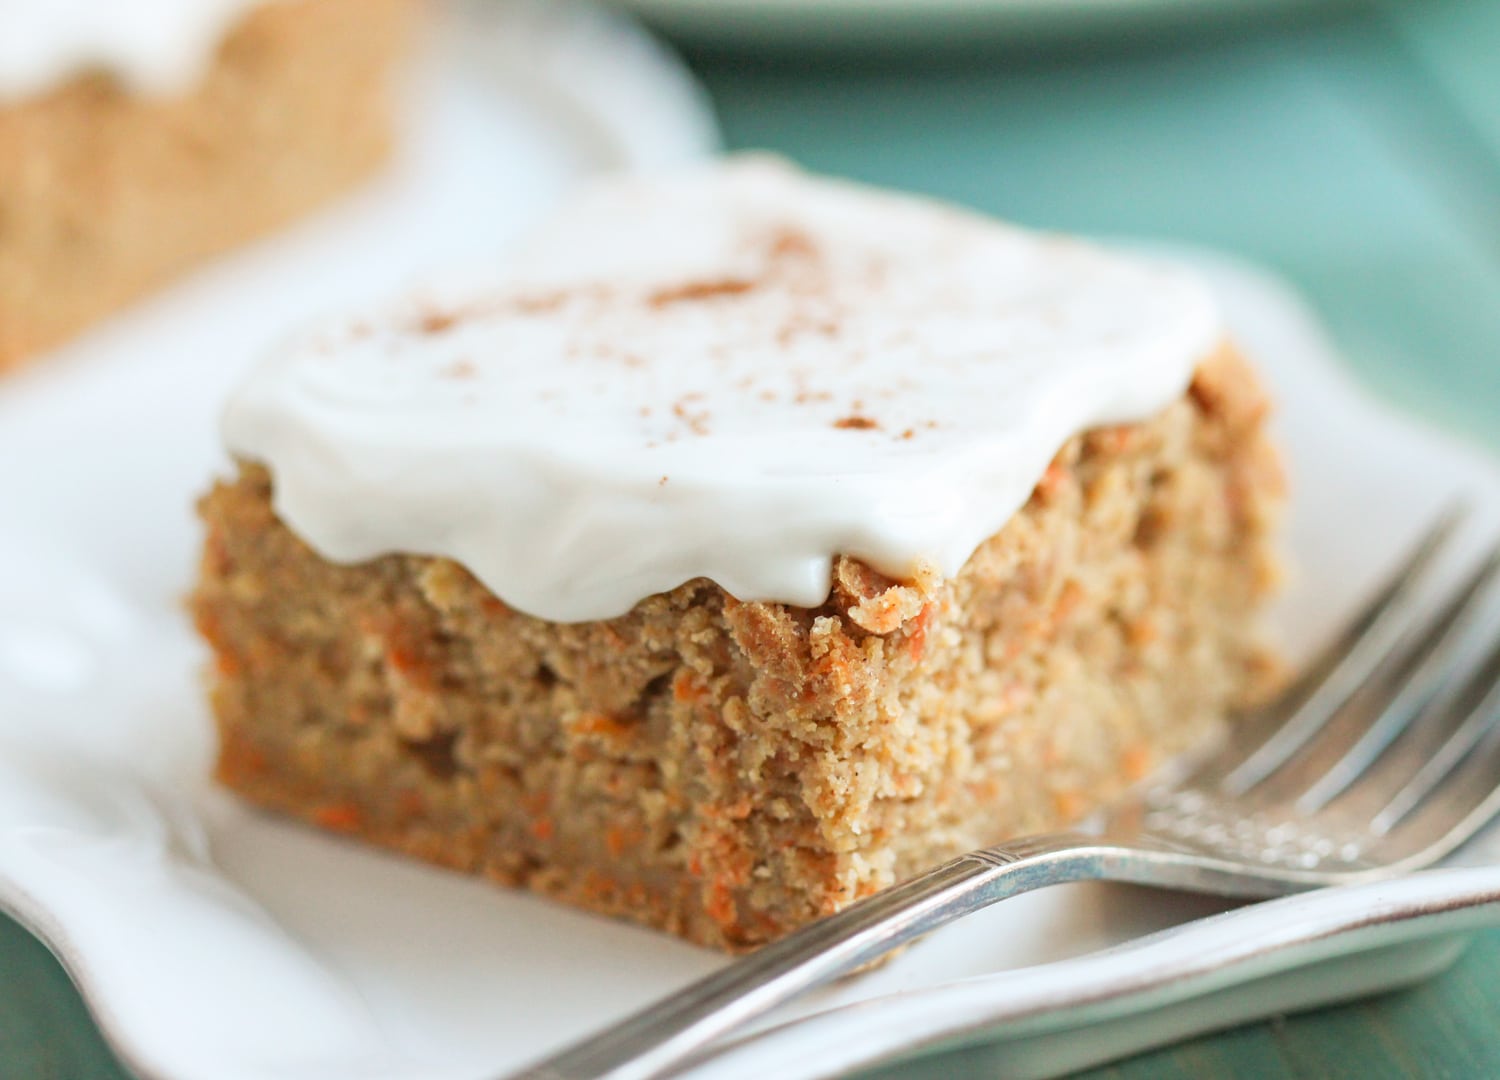 Carrot Dessert Recipes - 40 Different Ways to Make Carrot Cake